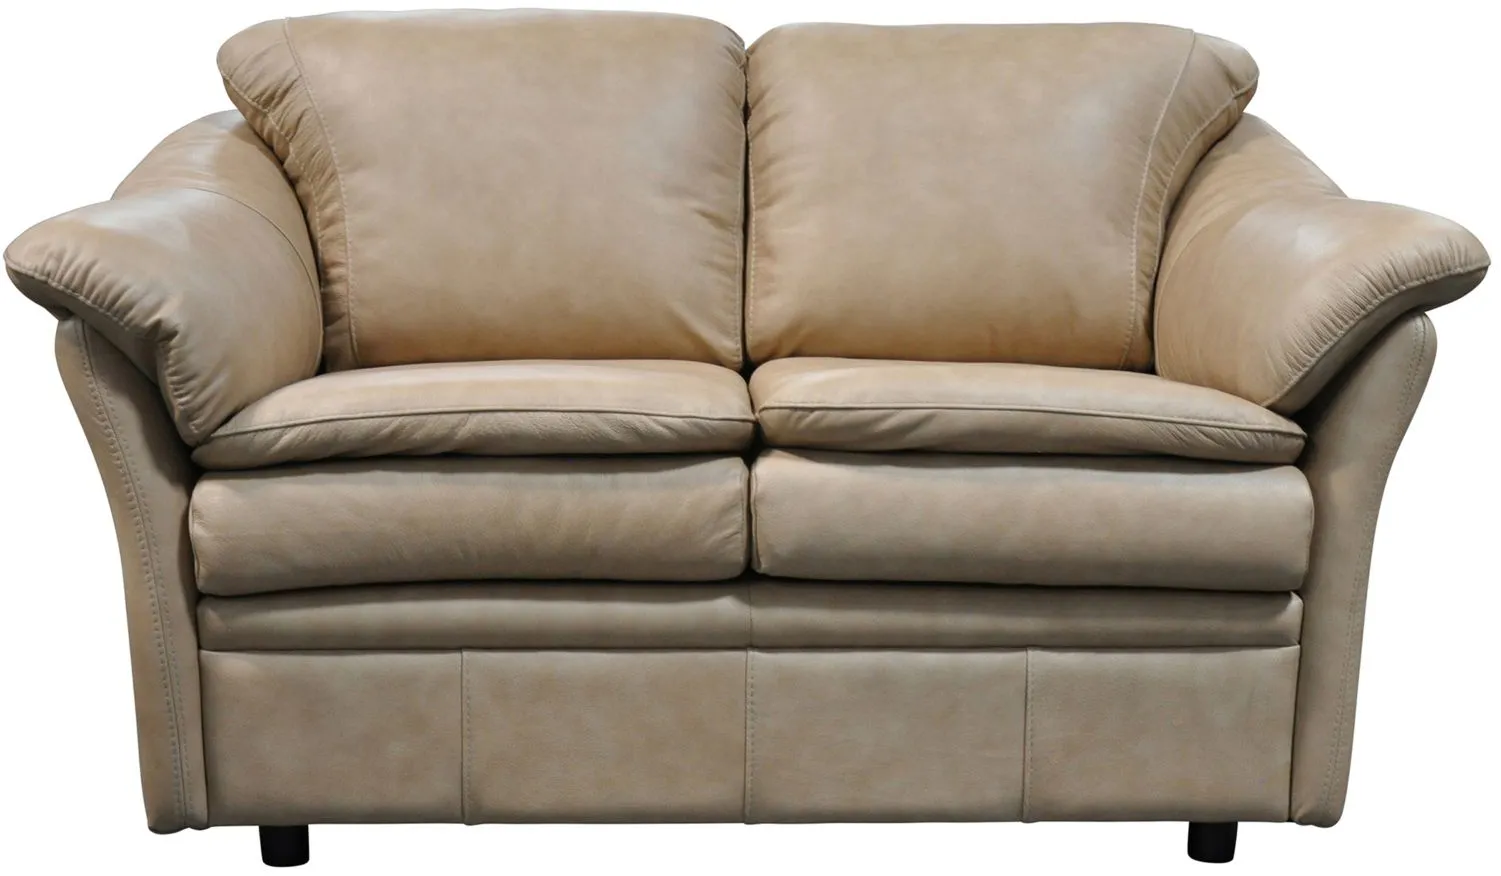 Uptown Loveseat in Urban Wheat by Omnia Leather